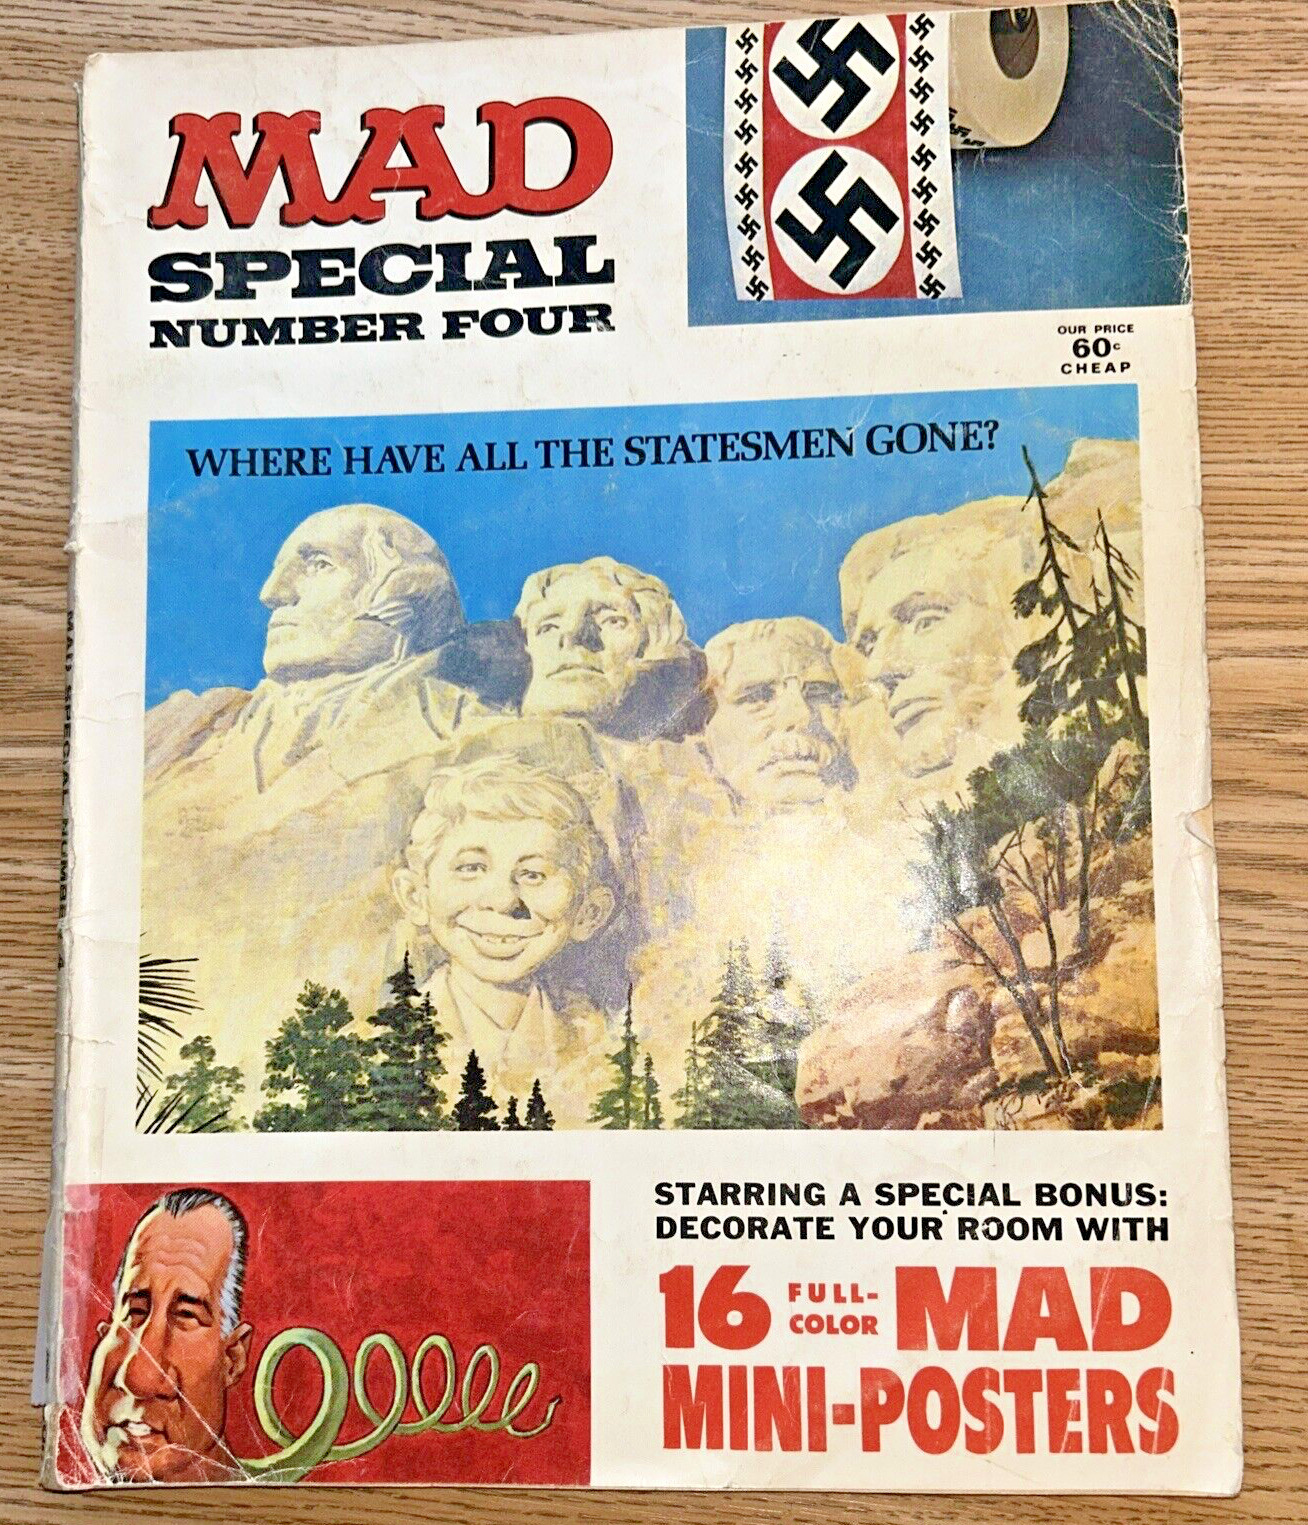 Mad Magazine Annual Special 1971 #4 16 Posters Clint Eastwood Sky Diving Fold-In